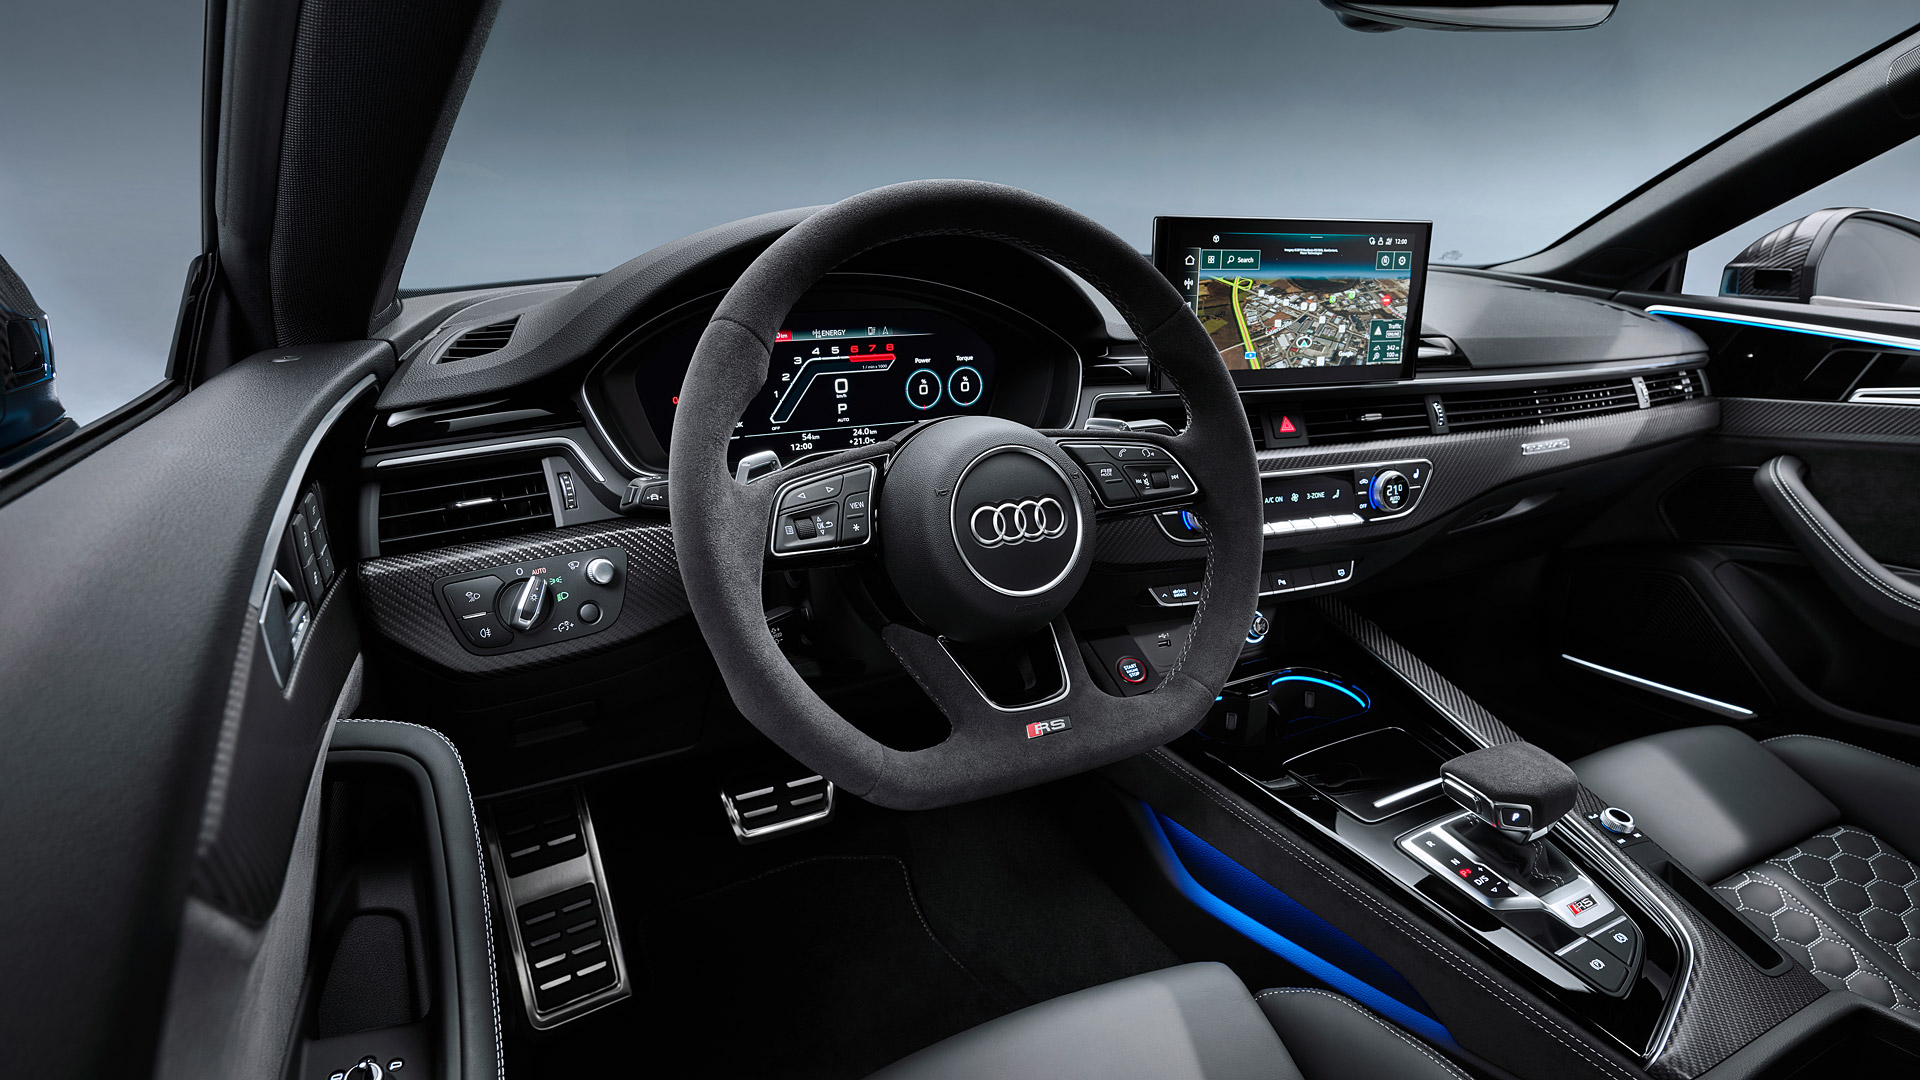  2020 Audi RS5 Coupe Wallpaper.